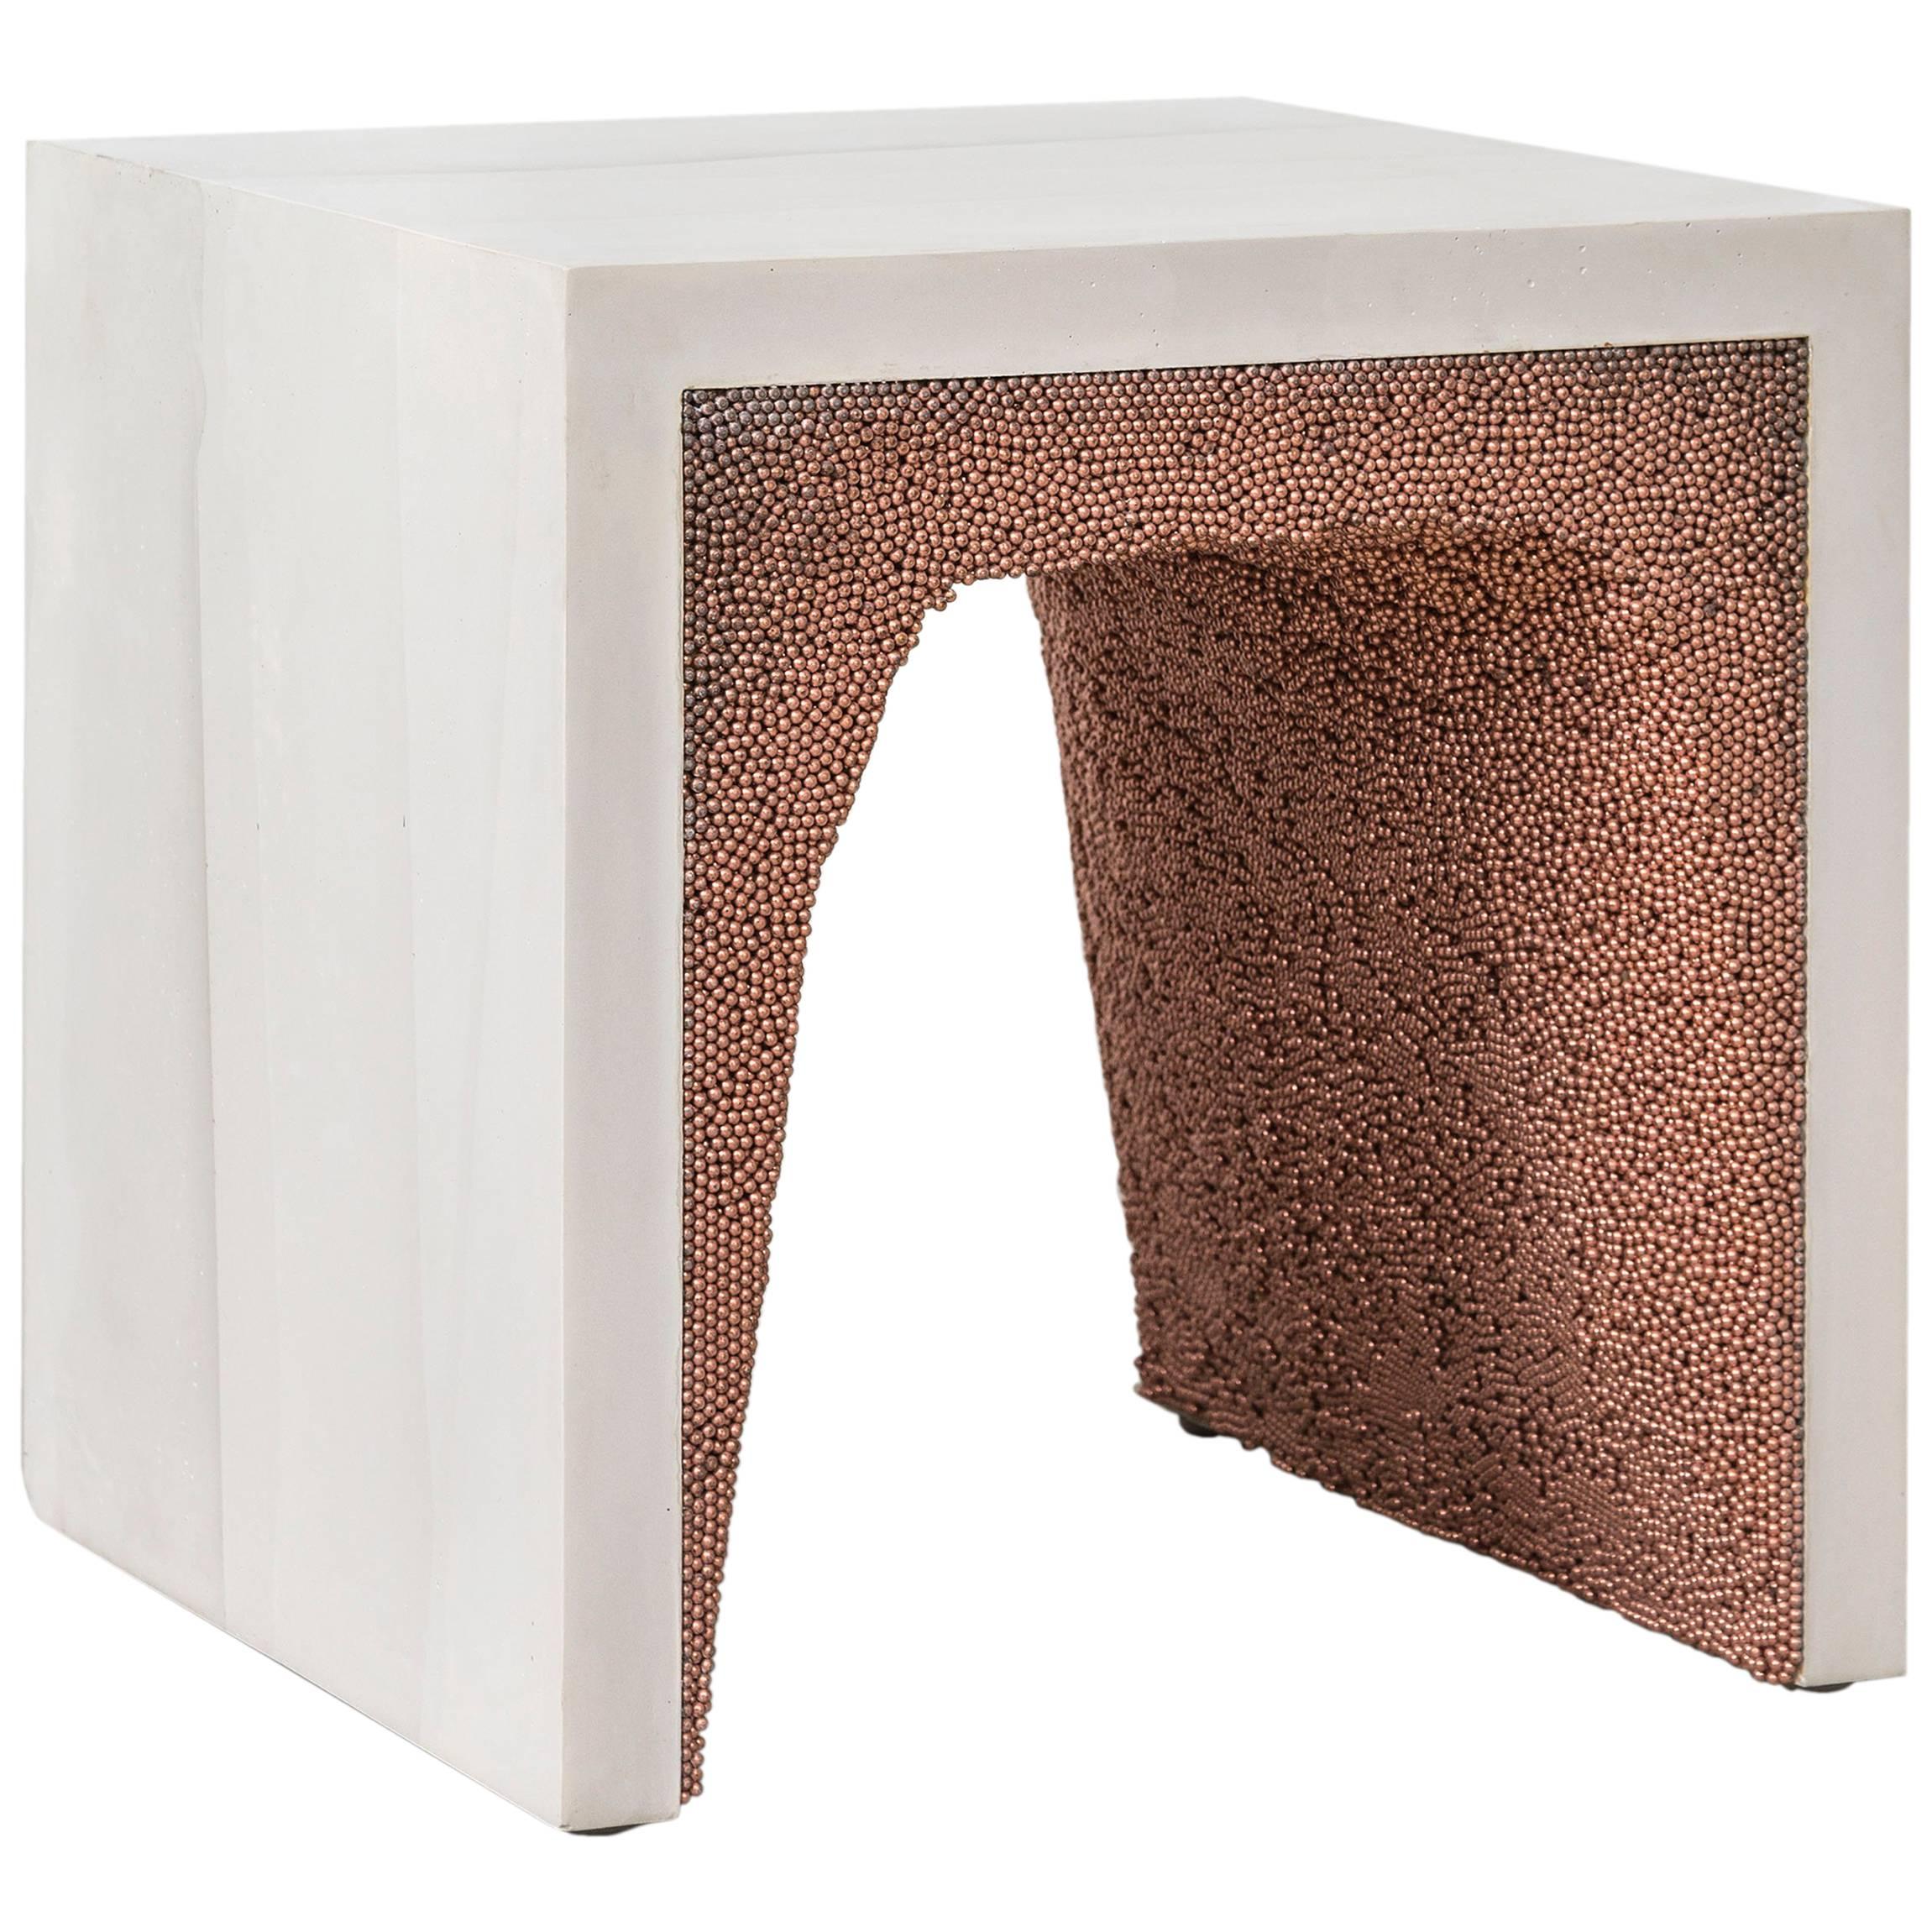 Strata 3 Side Table, White Cement and Copper BBS by Fernando Mastrangelo